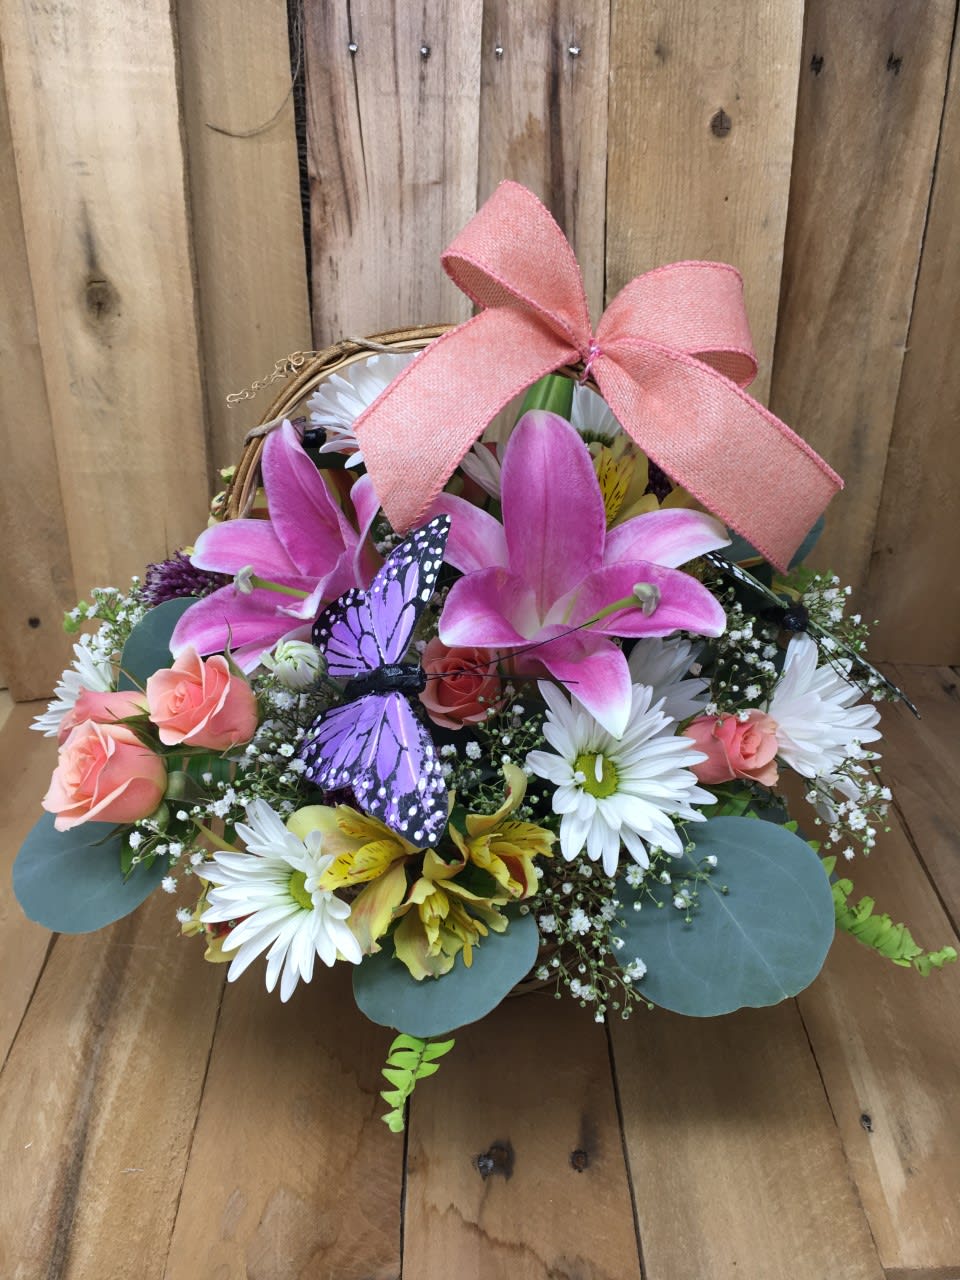 Spring Basket of Fresh Flowers - If you love Spring, this basket is perfect for you. This natural wicker basket is filled with fragrant lilies, miniature roses, daisies, alstroemerias, babies breath and greens. The ribbon and butterfly are the perfect spring accents to finish this bouquet.